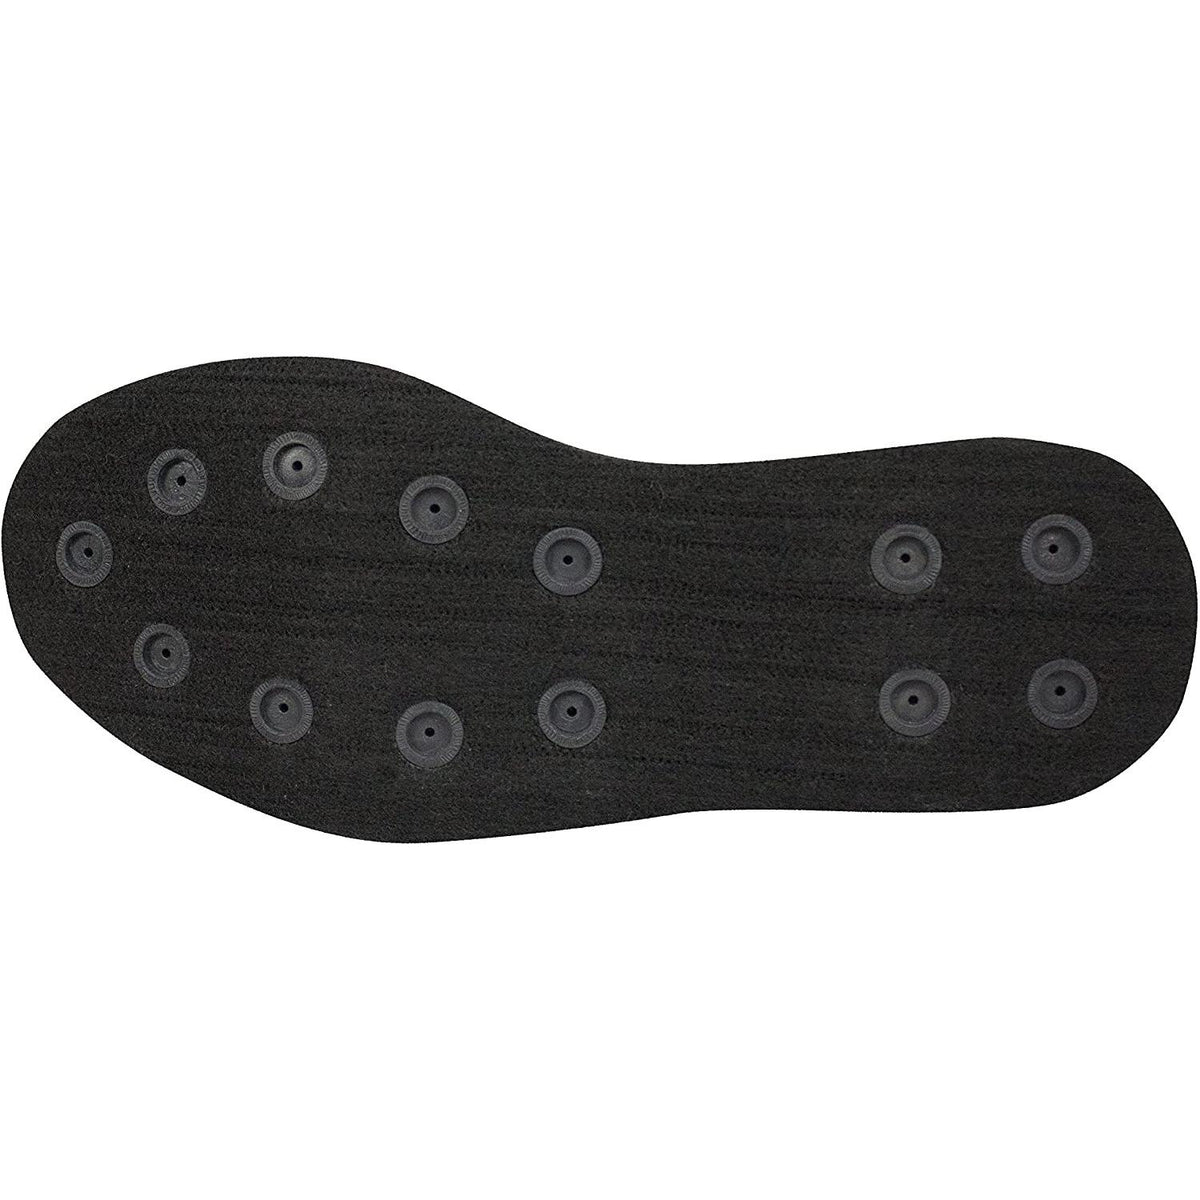 Compass 360 Tailwater II Felt Sole Wading Shoes